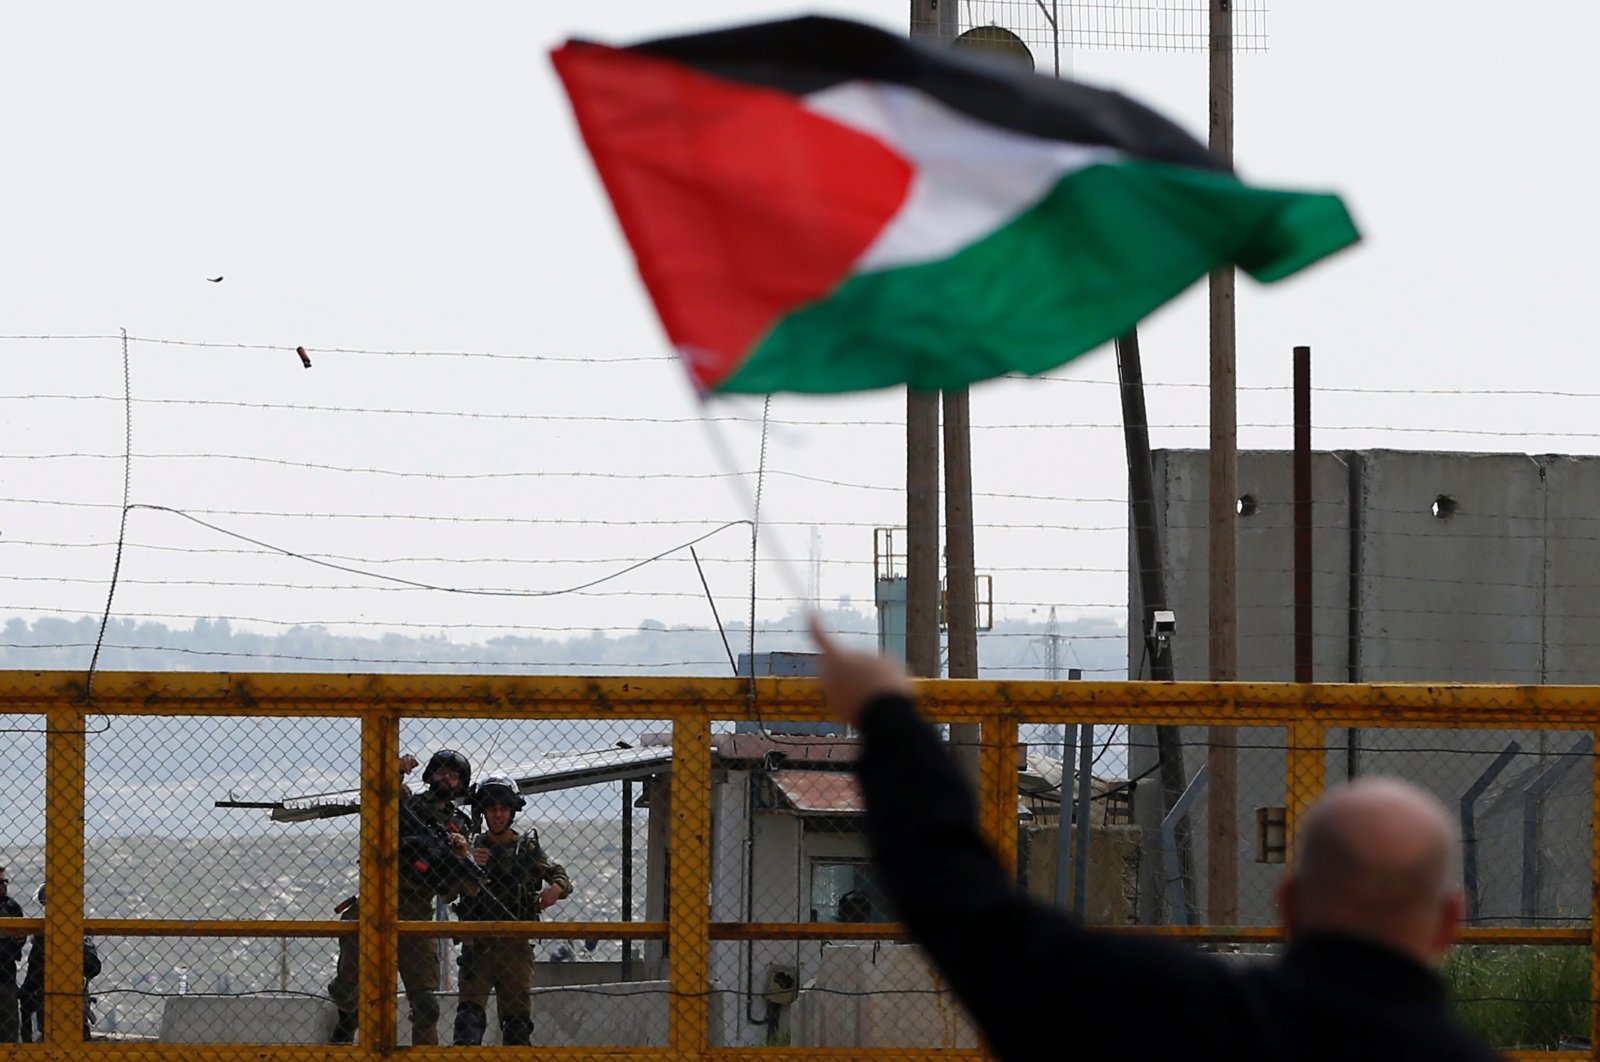 A Palestinian protester waves his national flag in front of Israeli security forces outside the compound of the Israeli-run Ofer prison near Betunia in the Israeli-occupied West Bank, March 30, 2016. (AFP Photo)